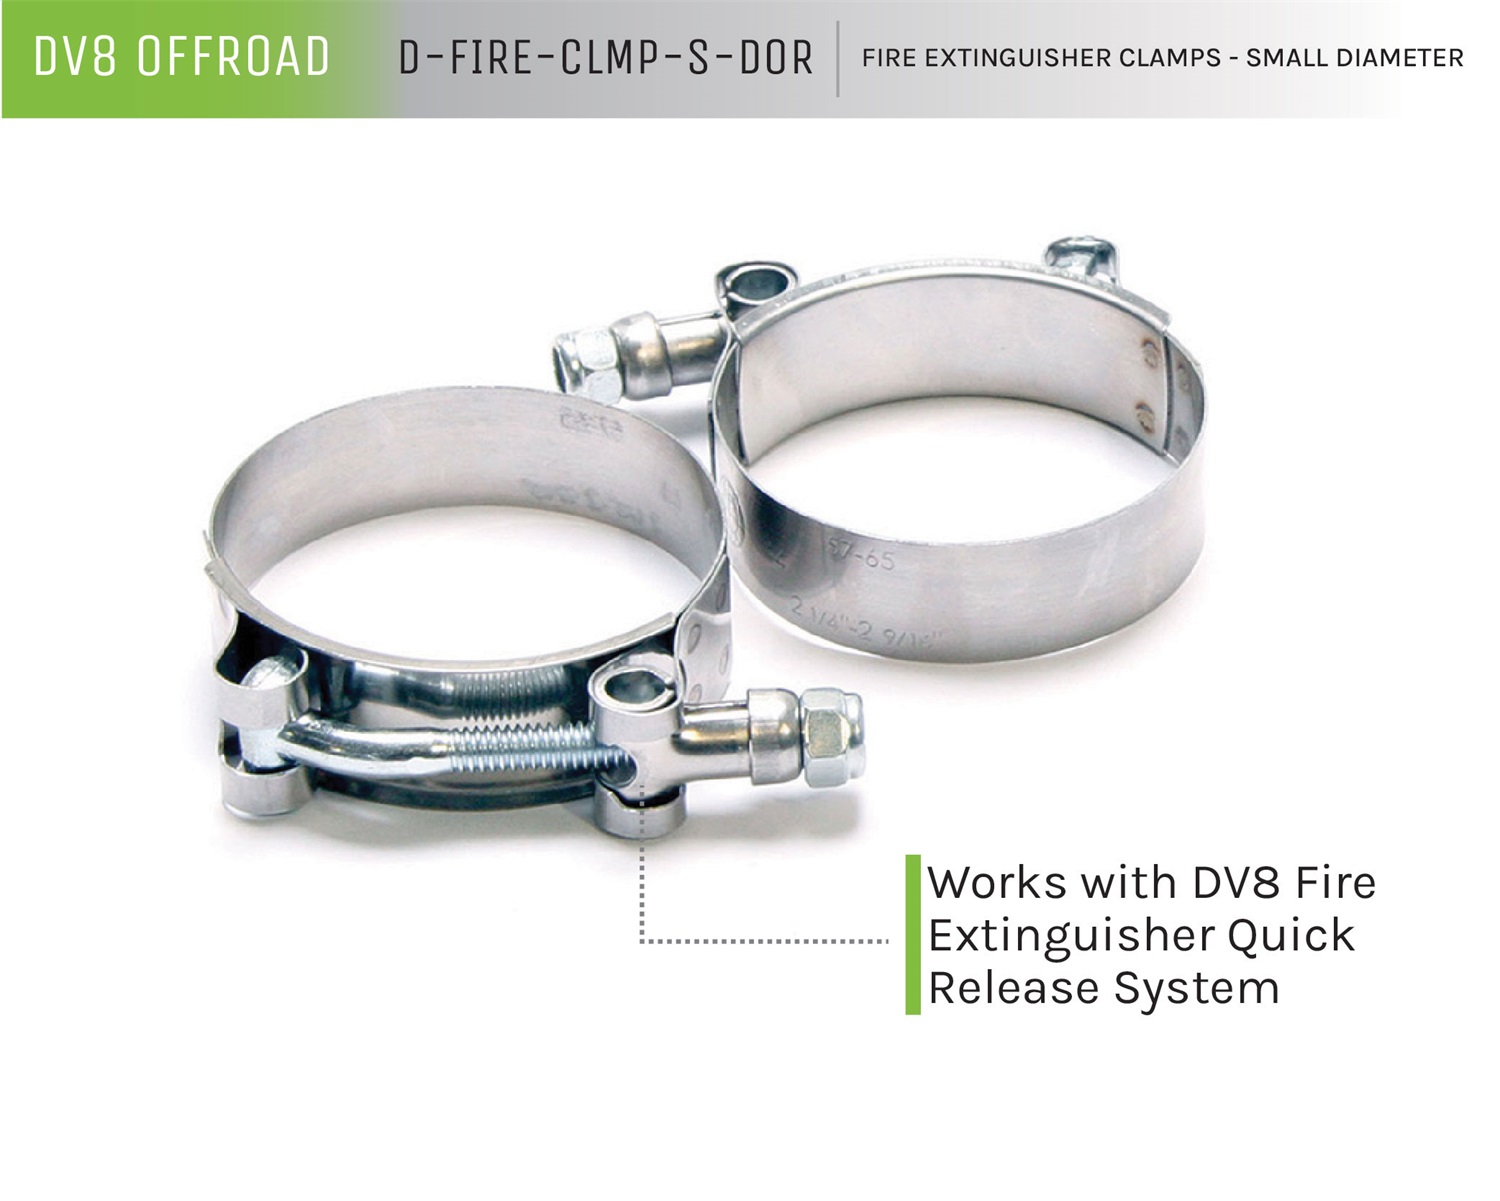 Fire Extinguisher Clamps